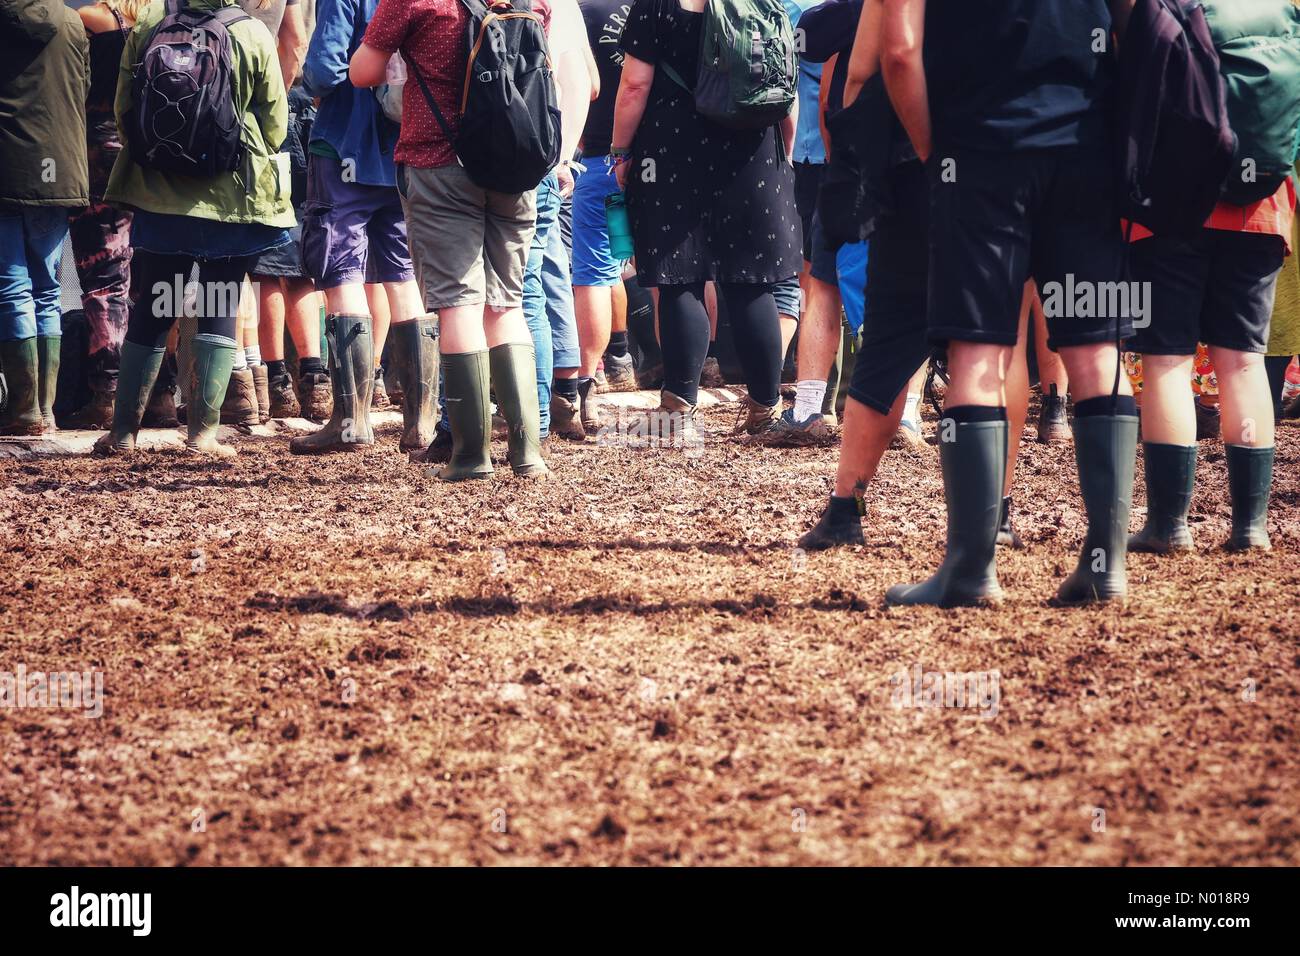 Green Man festival, Brecon Beacons, Wales, UK. 19th August, 2023. Boots de rigeur as wellied crowds enjoy mud at Green Man festival 2023. Credit: nidpor/Empics/Alamy Live News Stock Photo